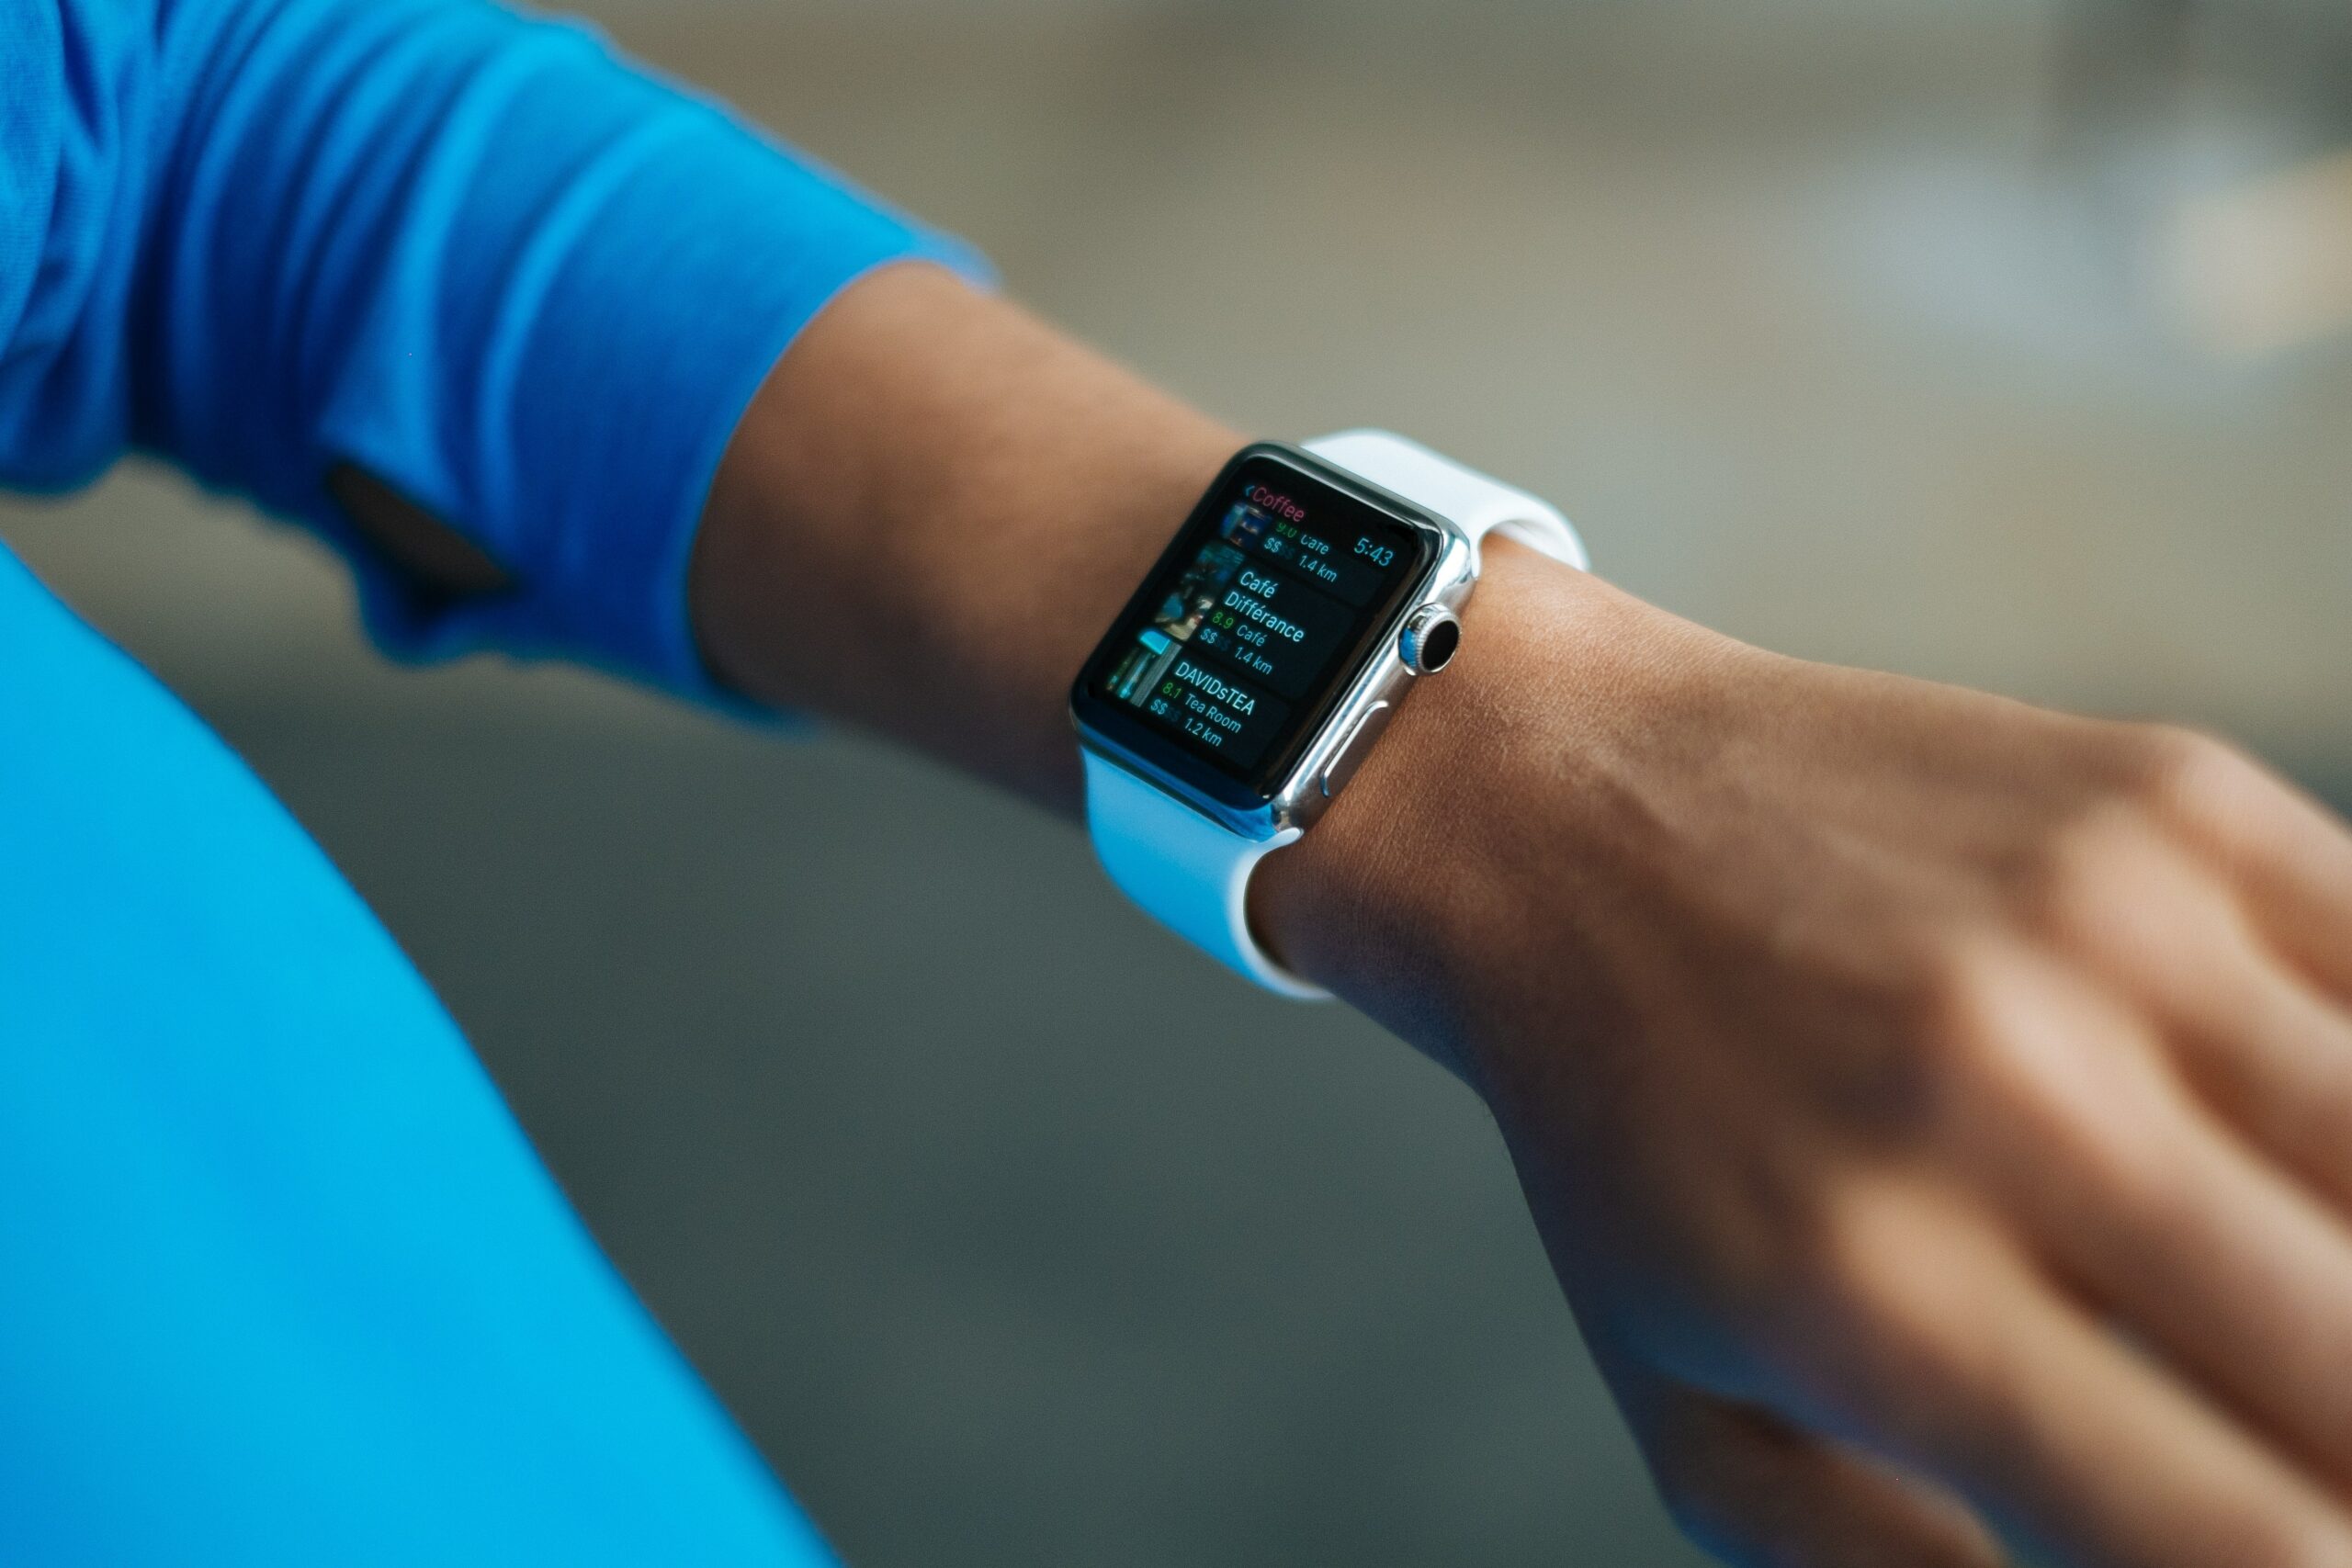 Apple watch on a person's wrist.